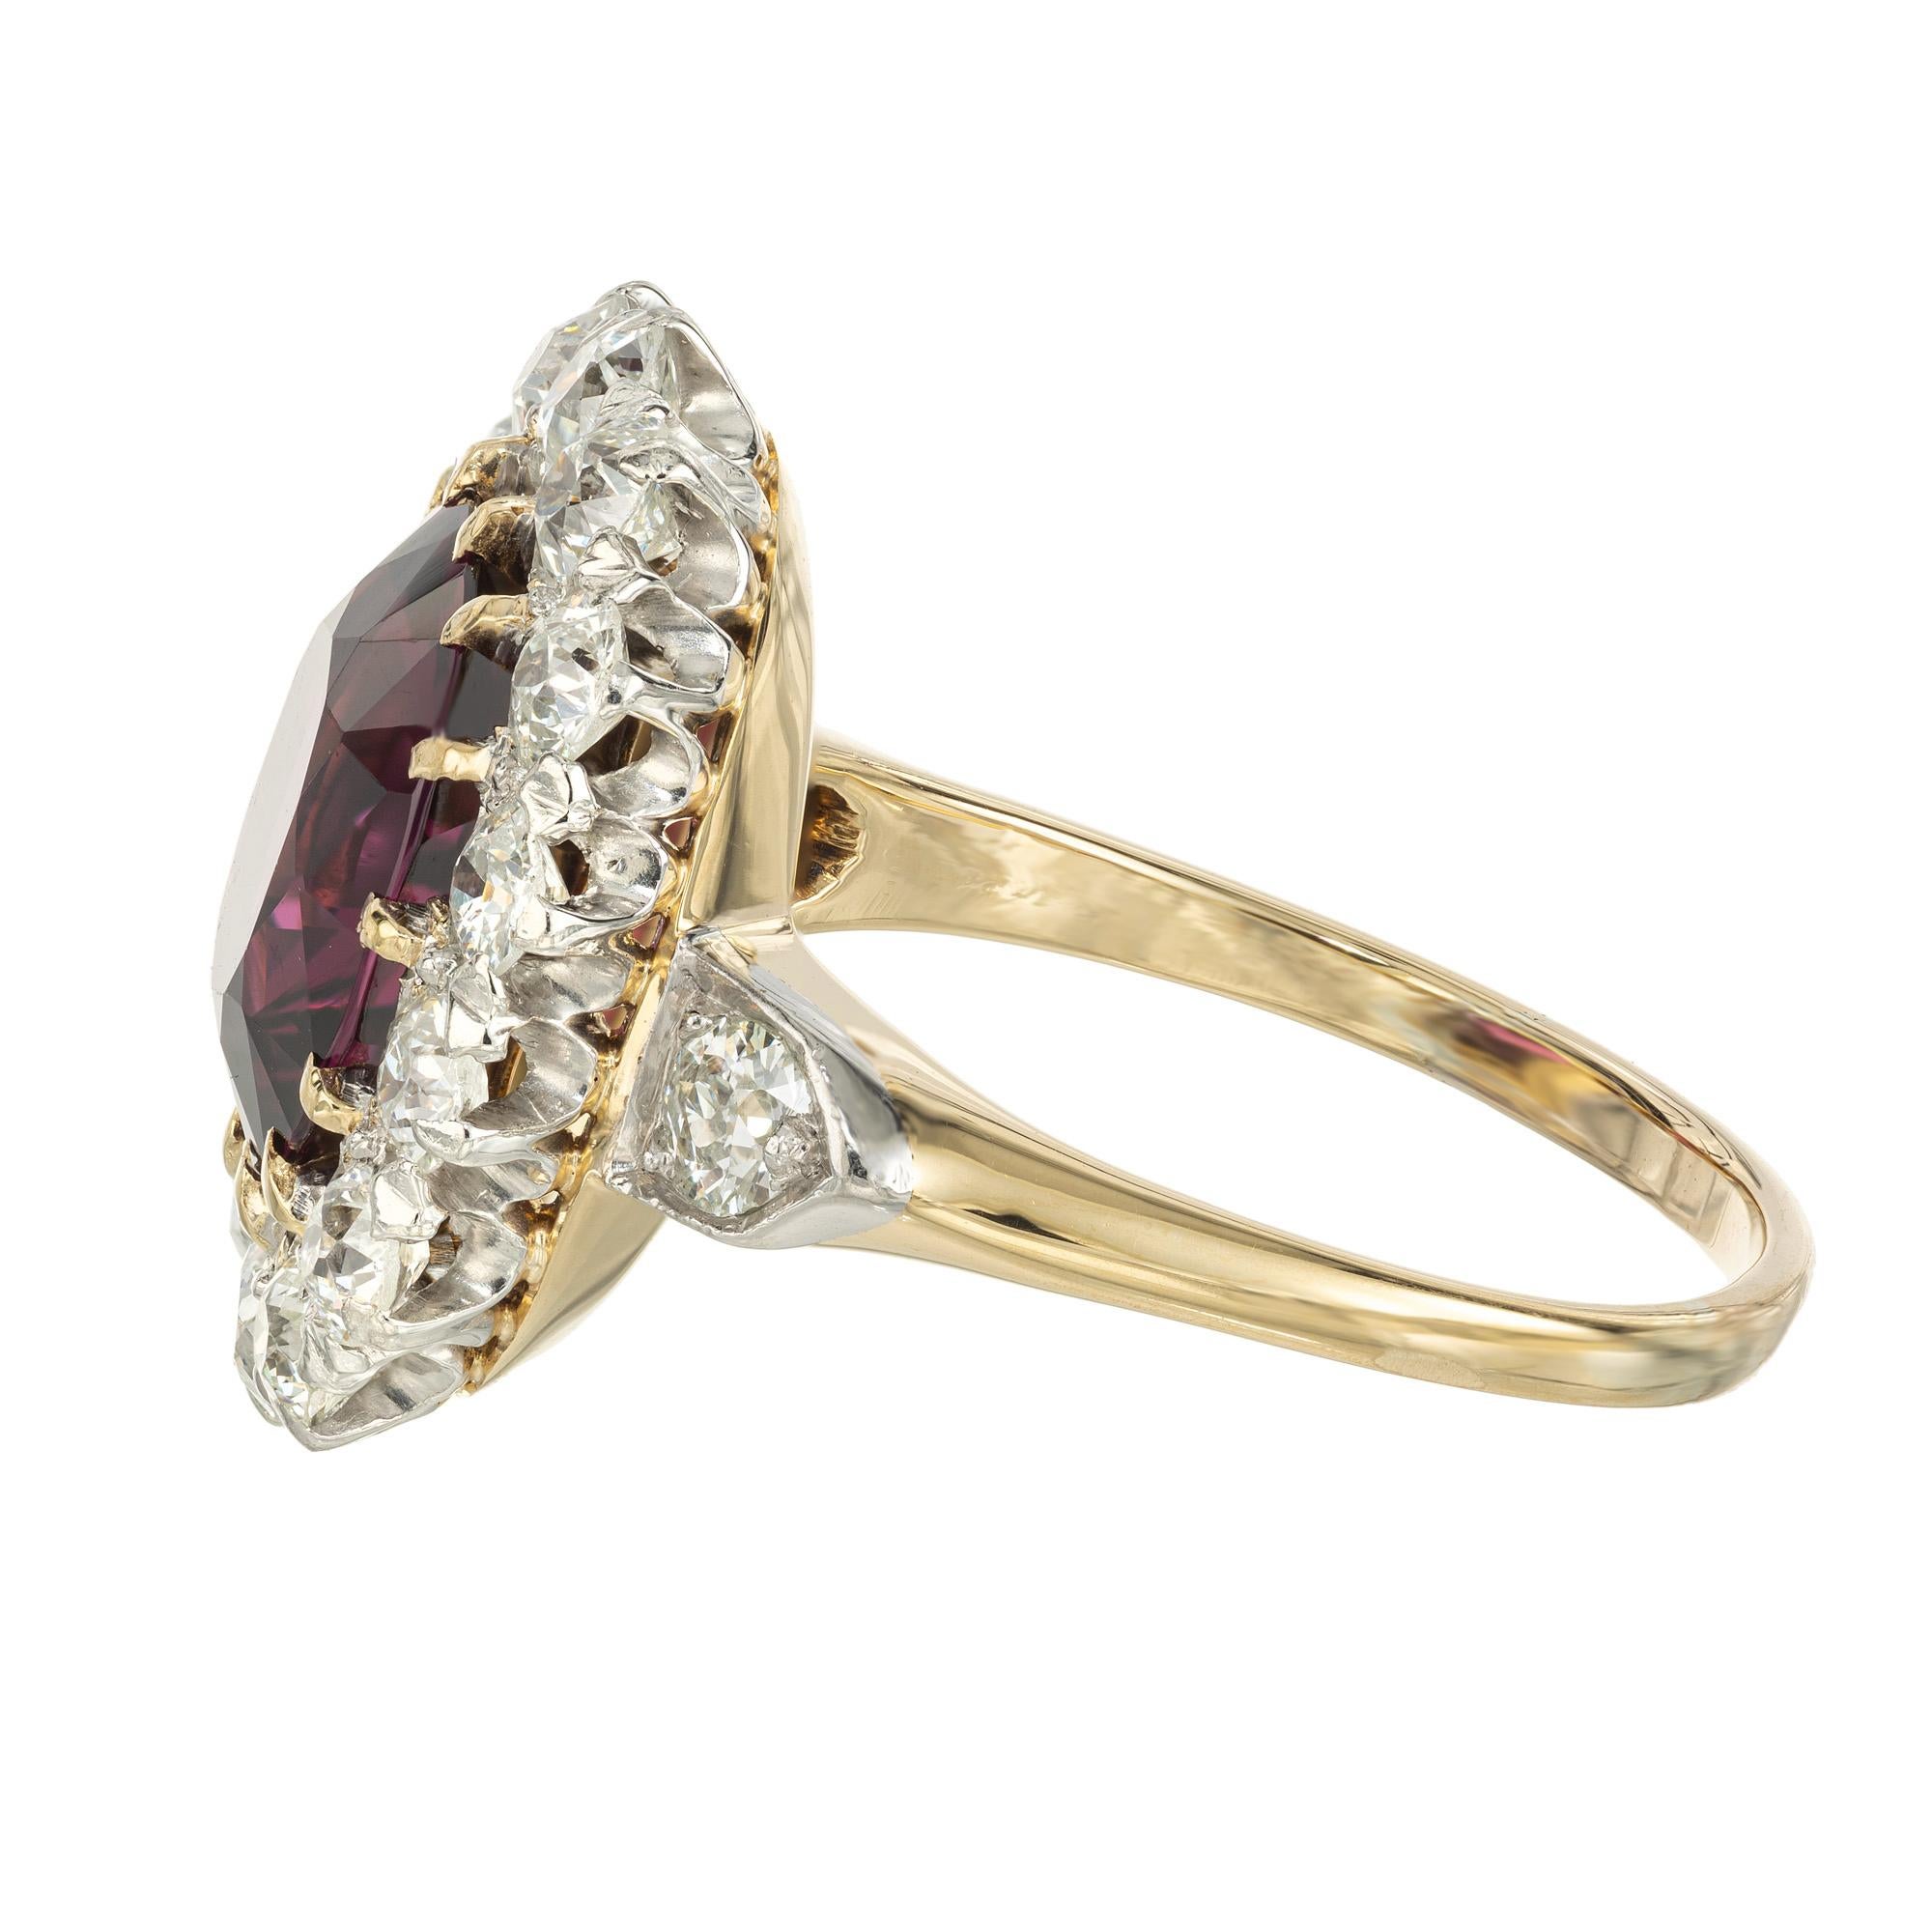 3.54 Carat Oval Garnet Diamond Halo Yellow Gold Engagement Ring In Good Condition For Sale In Stamford, CT